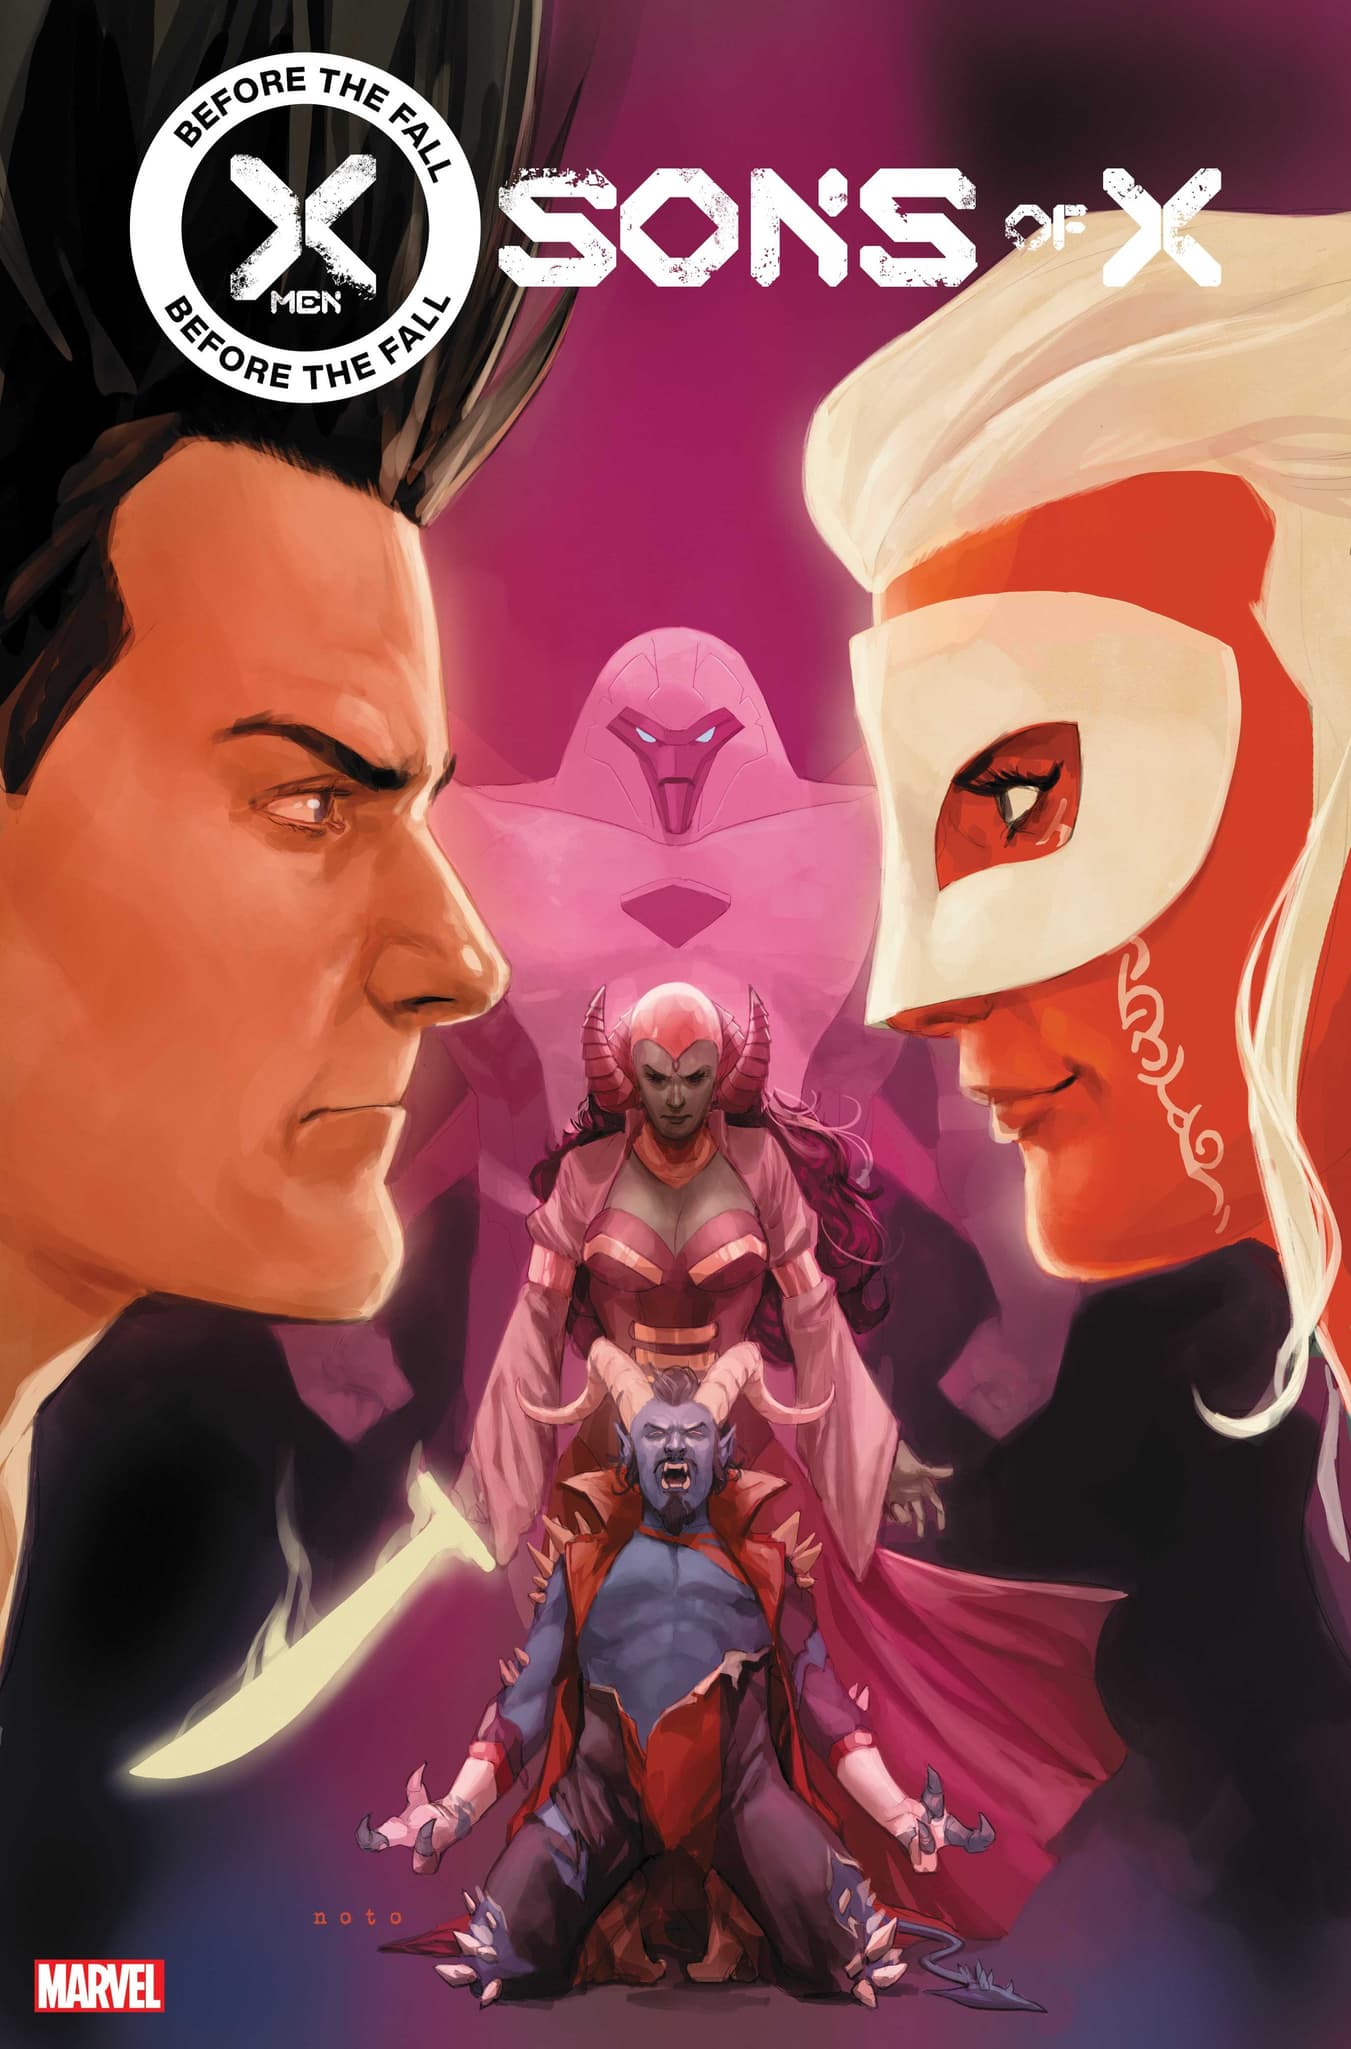 X-MEN: BEFORE THE FALL – SONS OF X #1 cover by Phil Noto